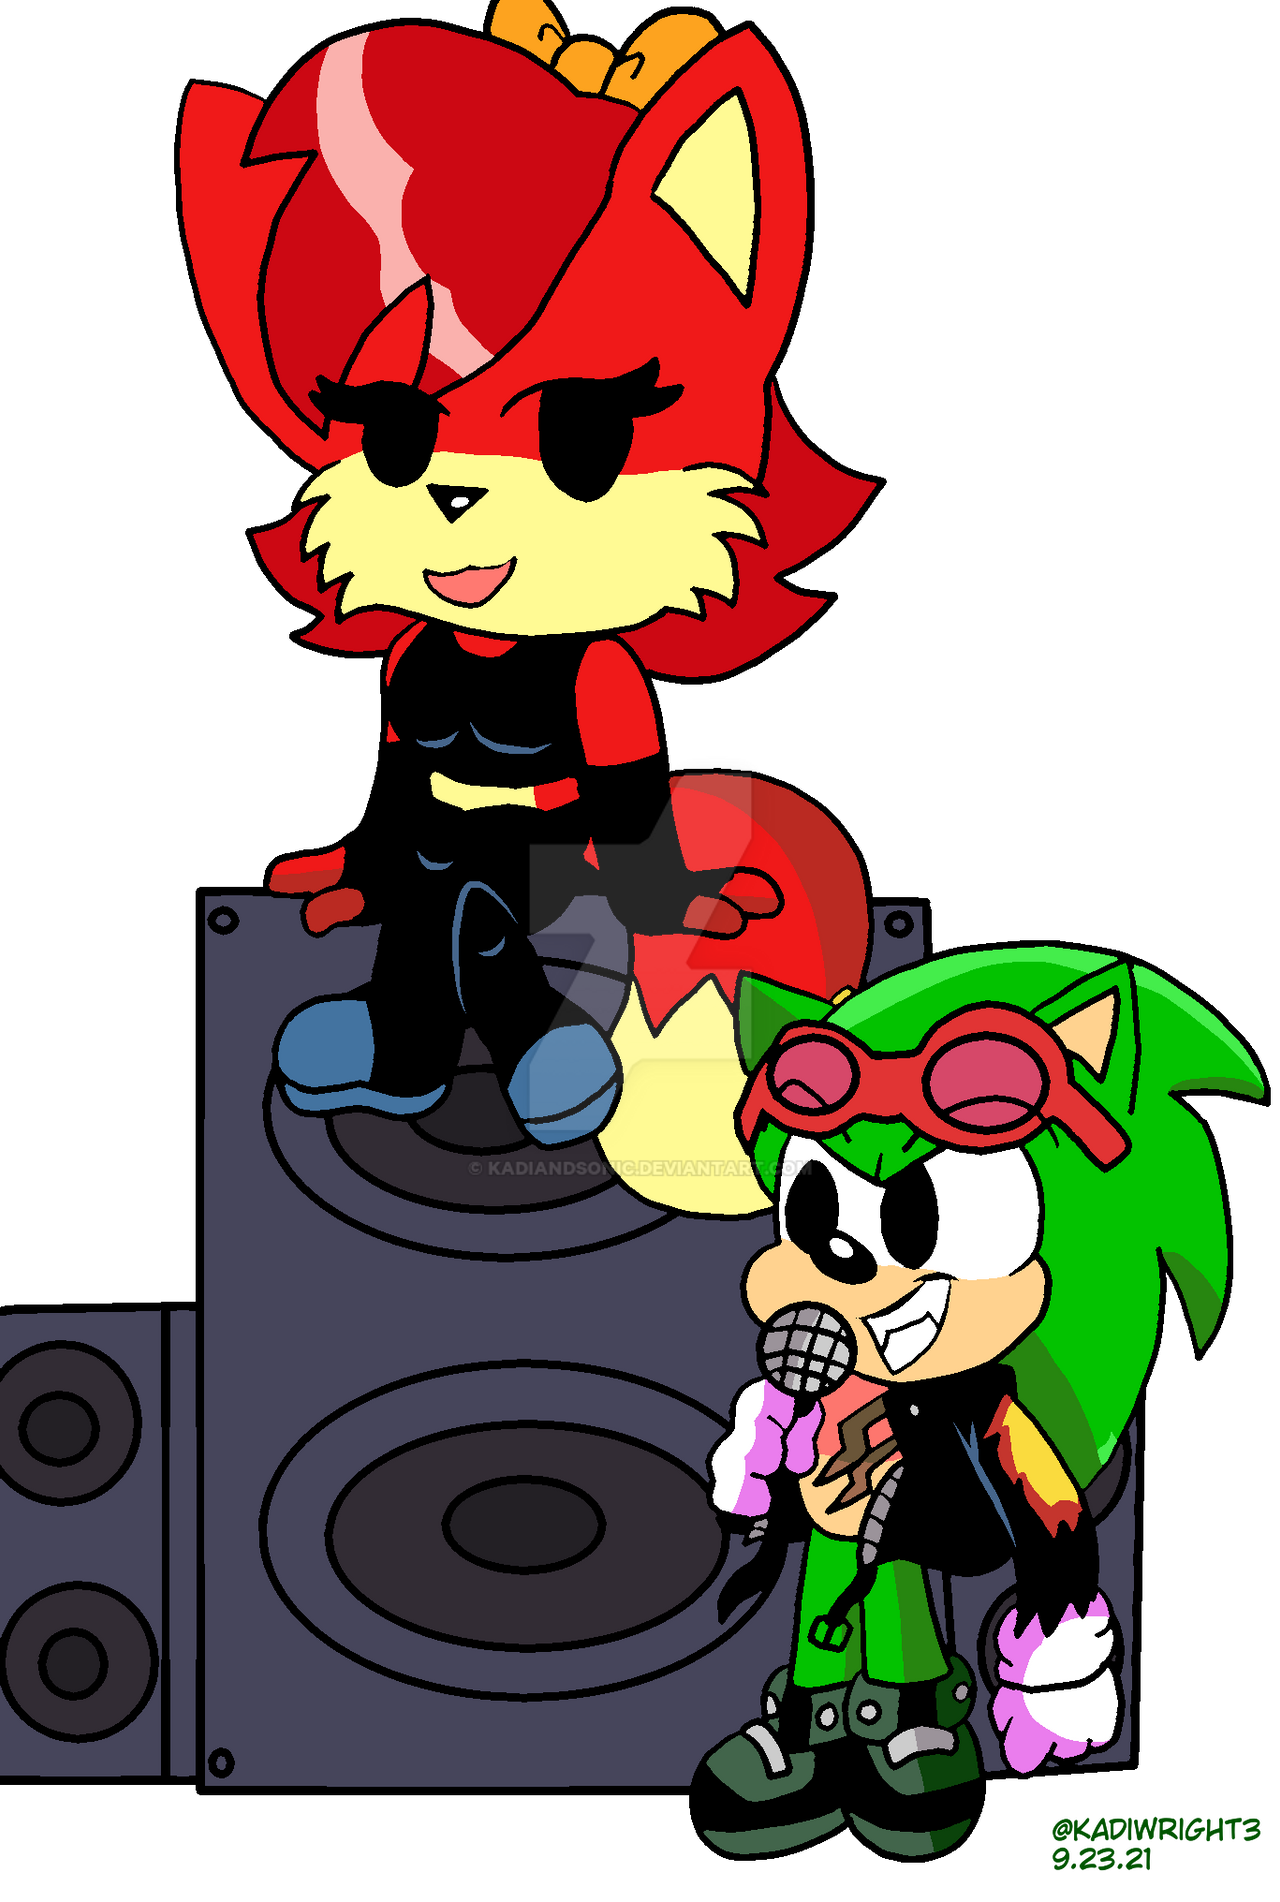 Scourge And Fiona In Friday Night Funkin By Kadiandsonic On Deviantart